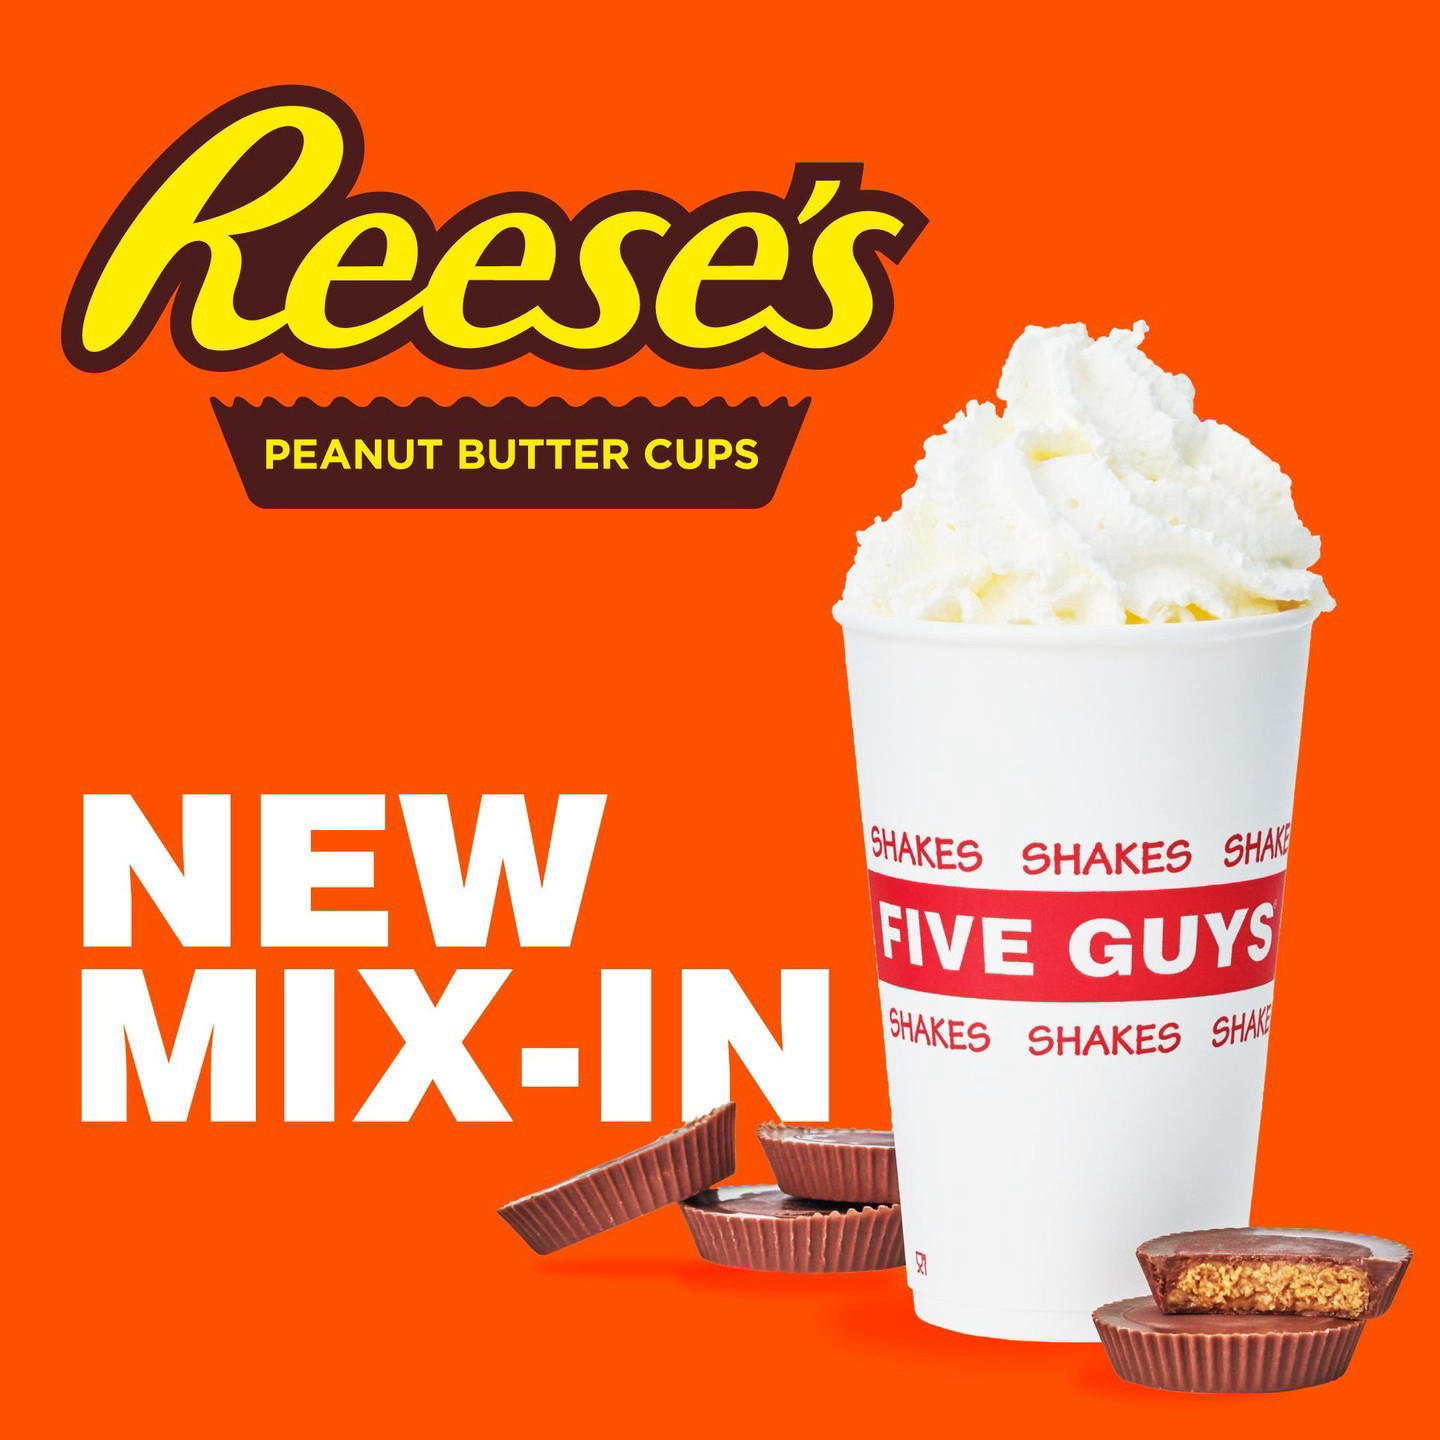 image  1 Five Guys - We have teamed up with REESE'S to create the perfect milkshake